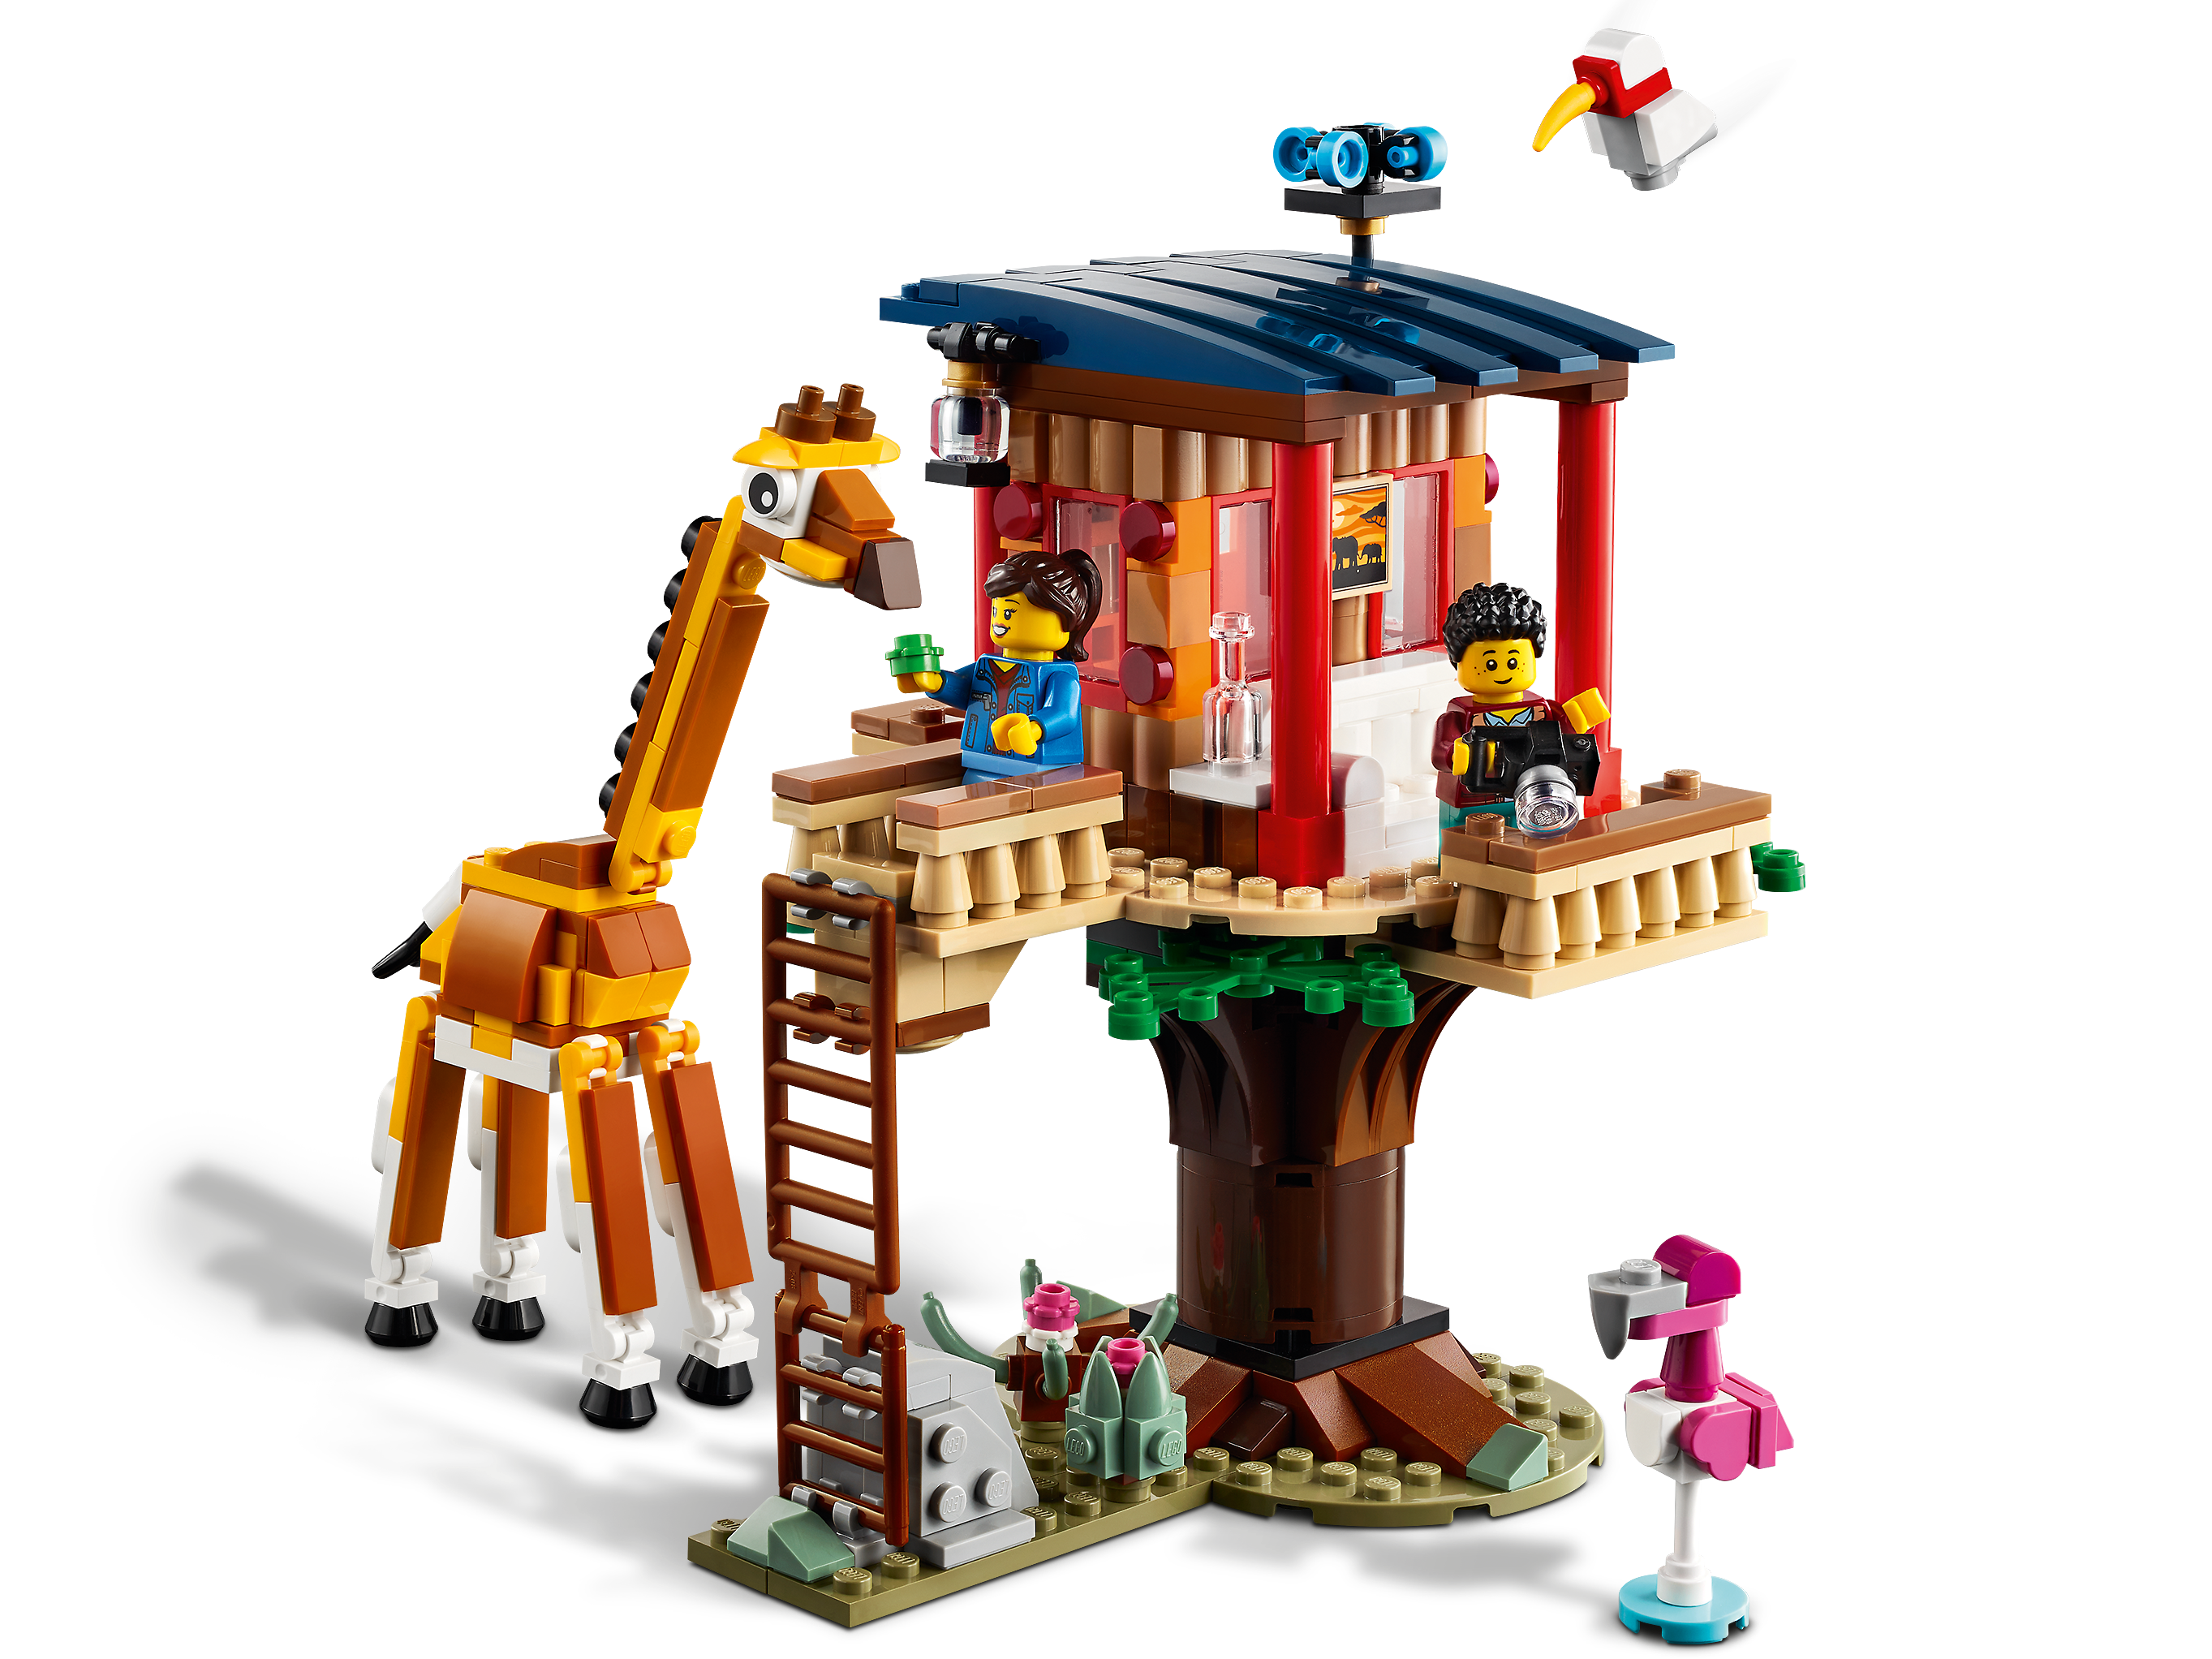 397 Pieces LEGO Creator 3in1 Safari Wildlife Tree House 31116 Building Kit Featuring a House Toy New 2021 Biplane Toy and Catamaran Toy; Best Building Sets for Kids Who Love Imaginative Play